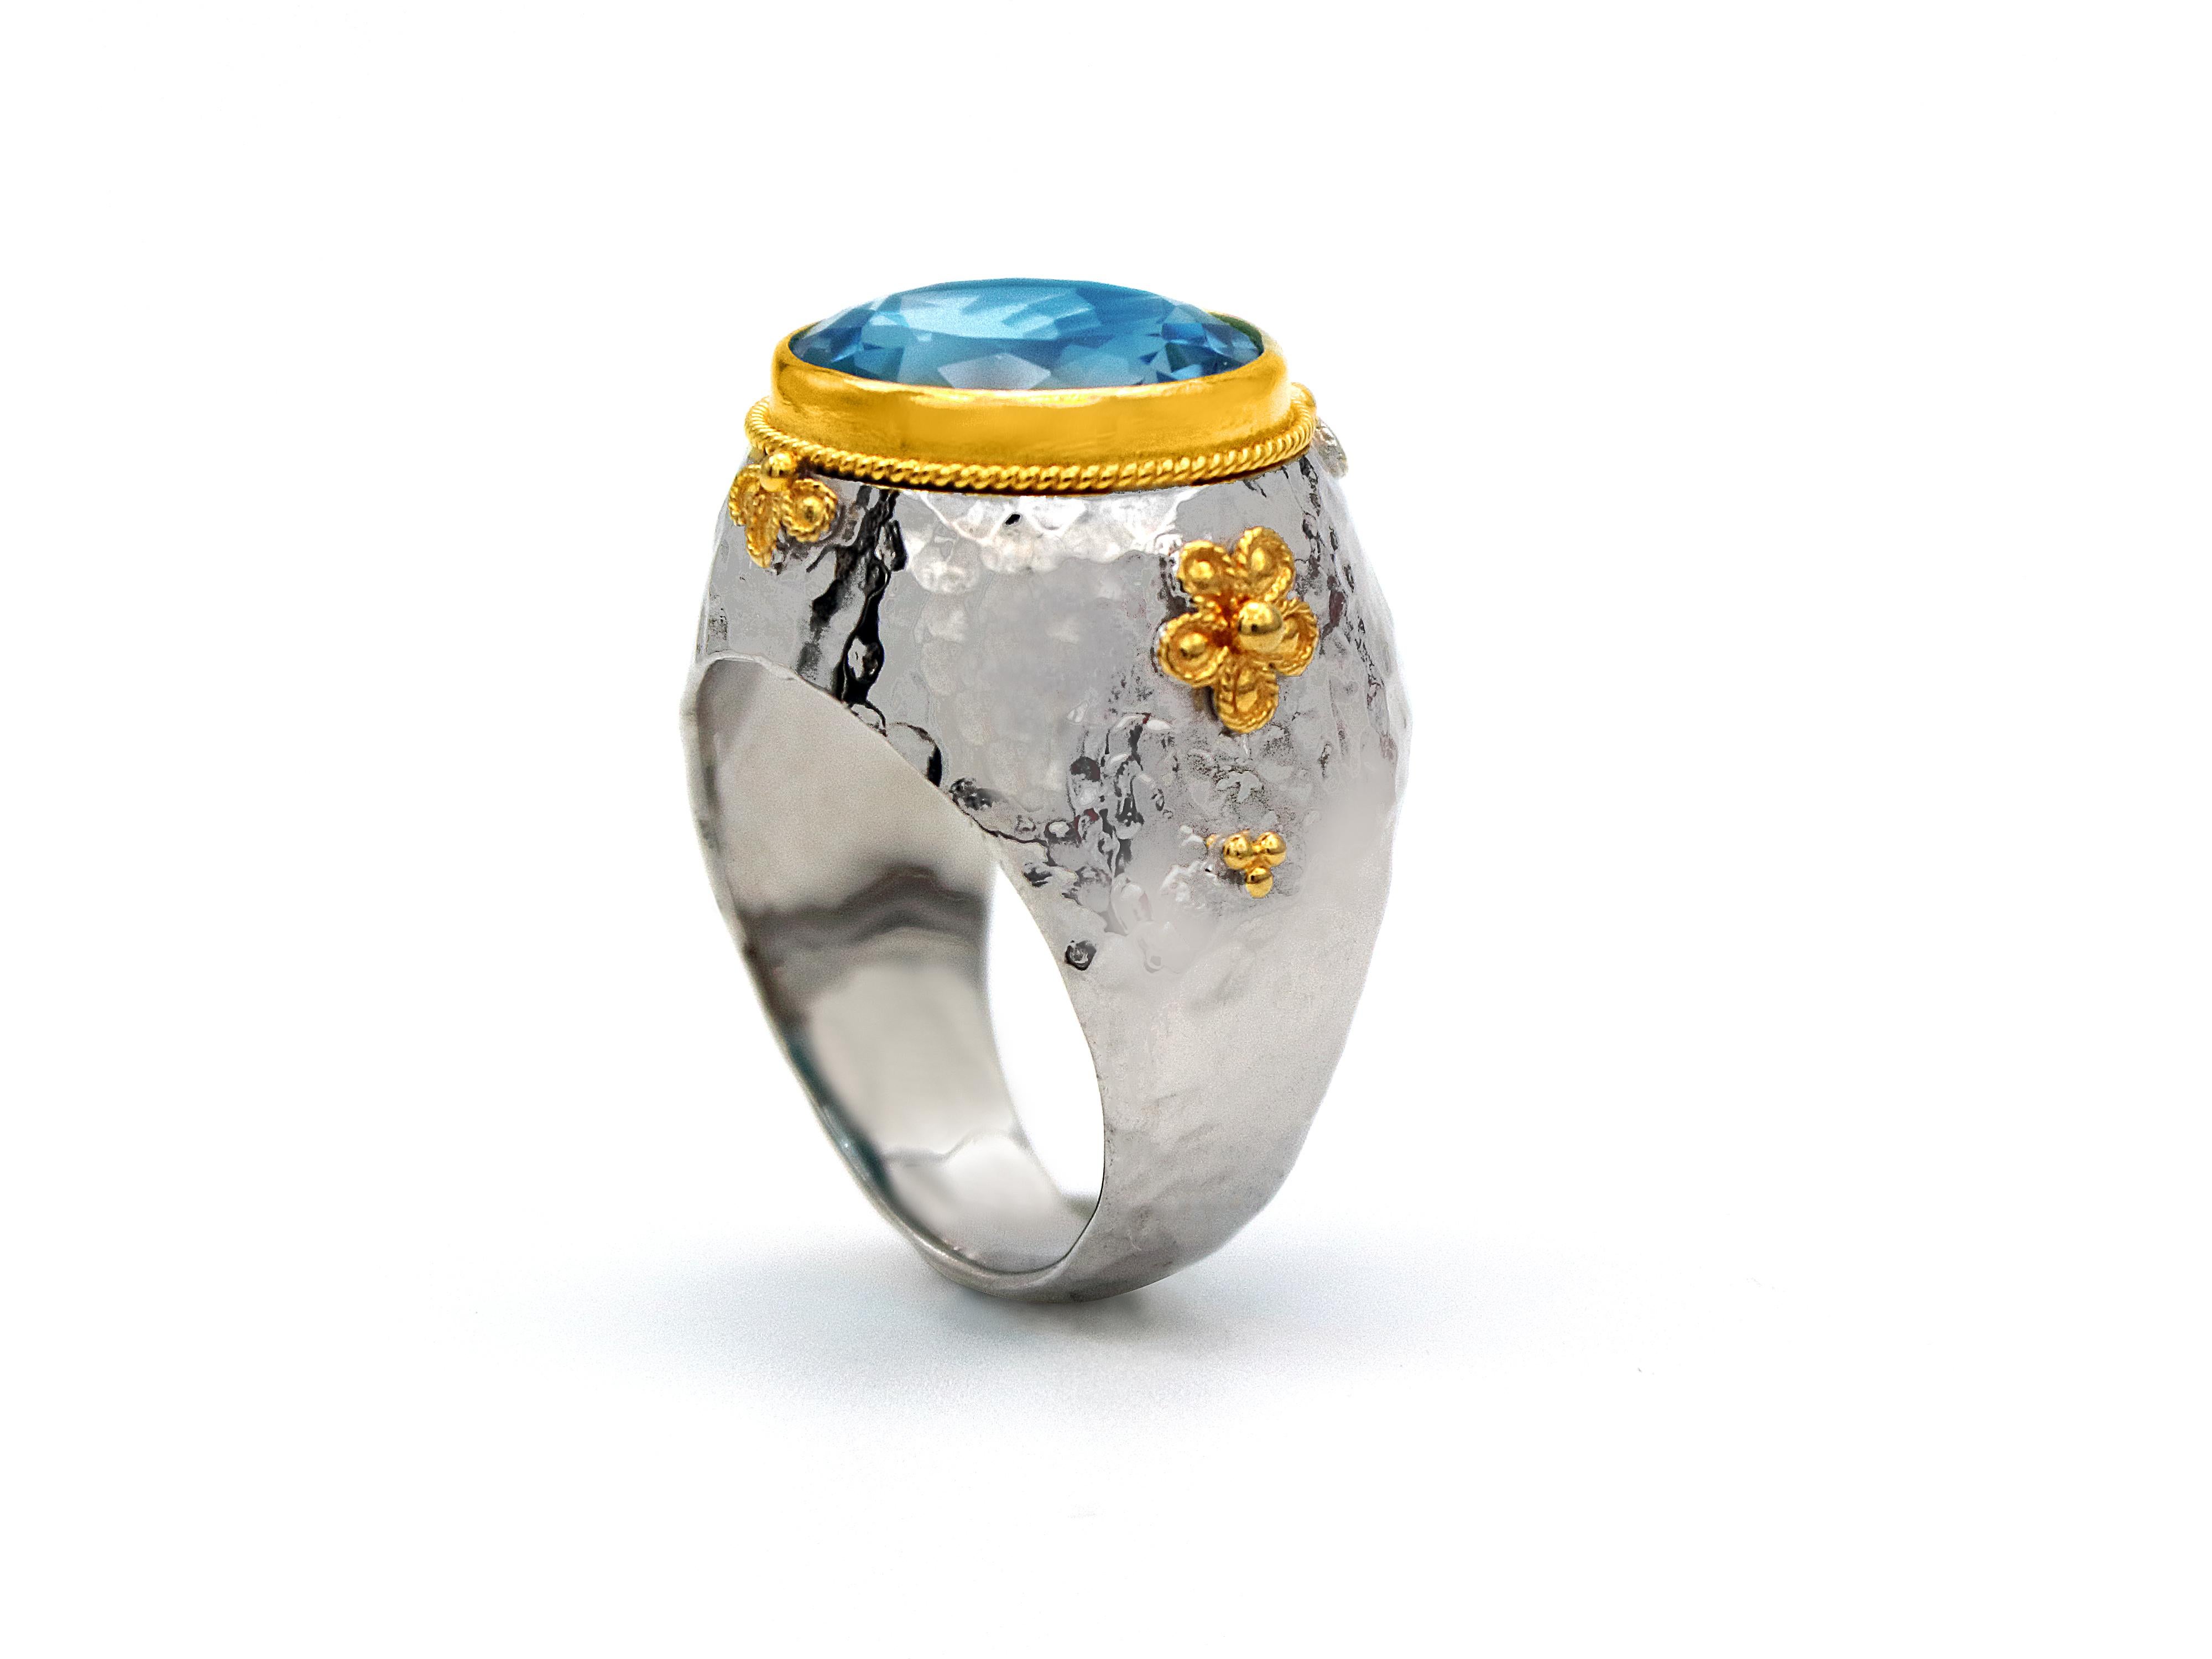 A mix and match of metals and colors. Sterling silver base, hummer worked and decorated with 18 karat yellow gold. Set with Baby Blue Topaz in a around briolette cut that the multi facets play so strong with the light and show its amazing color. The